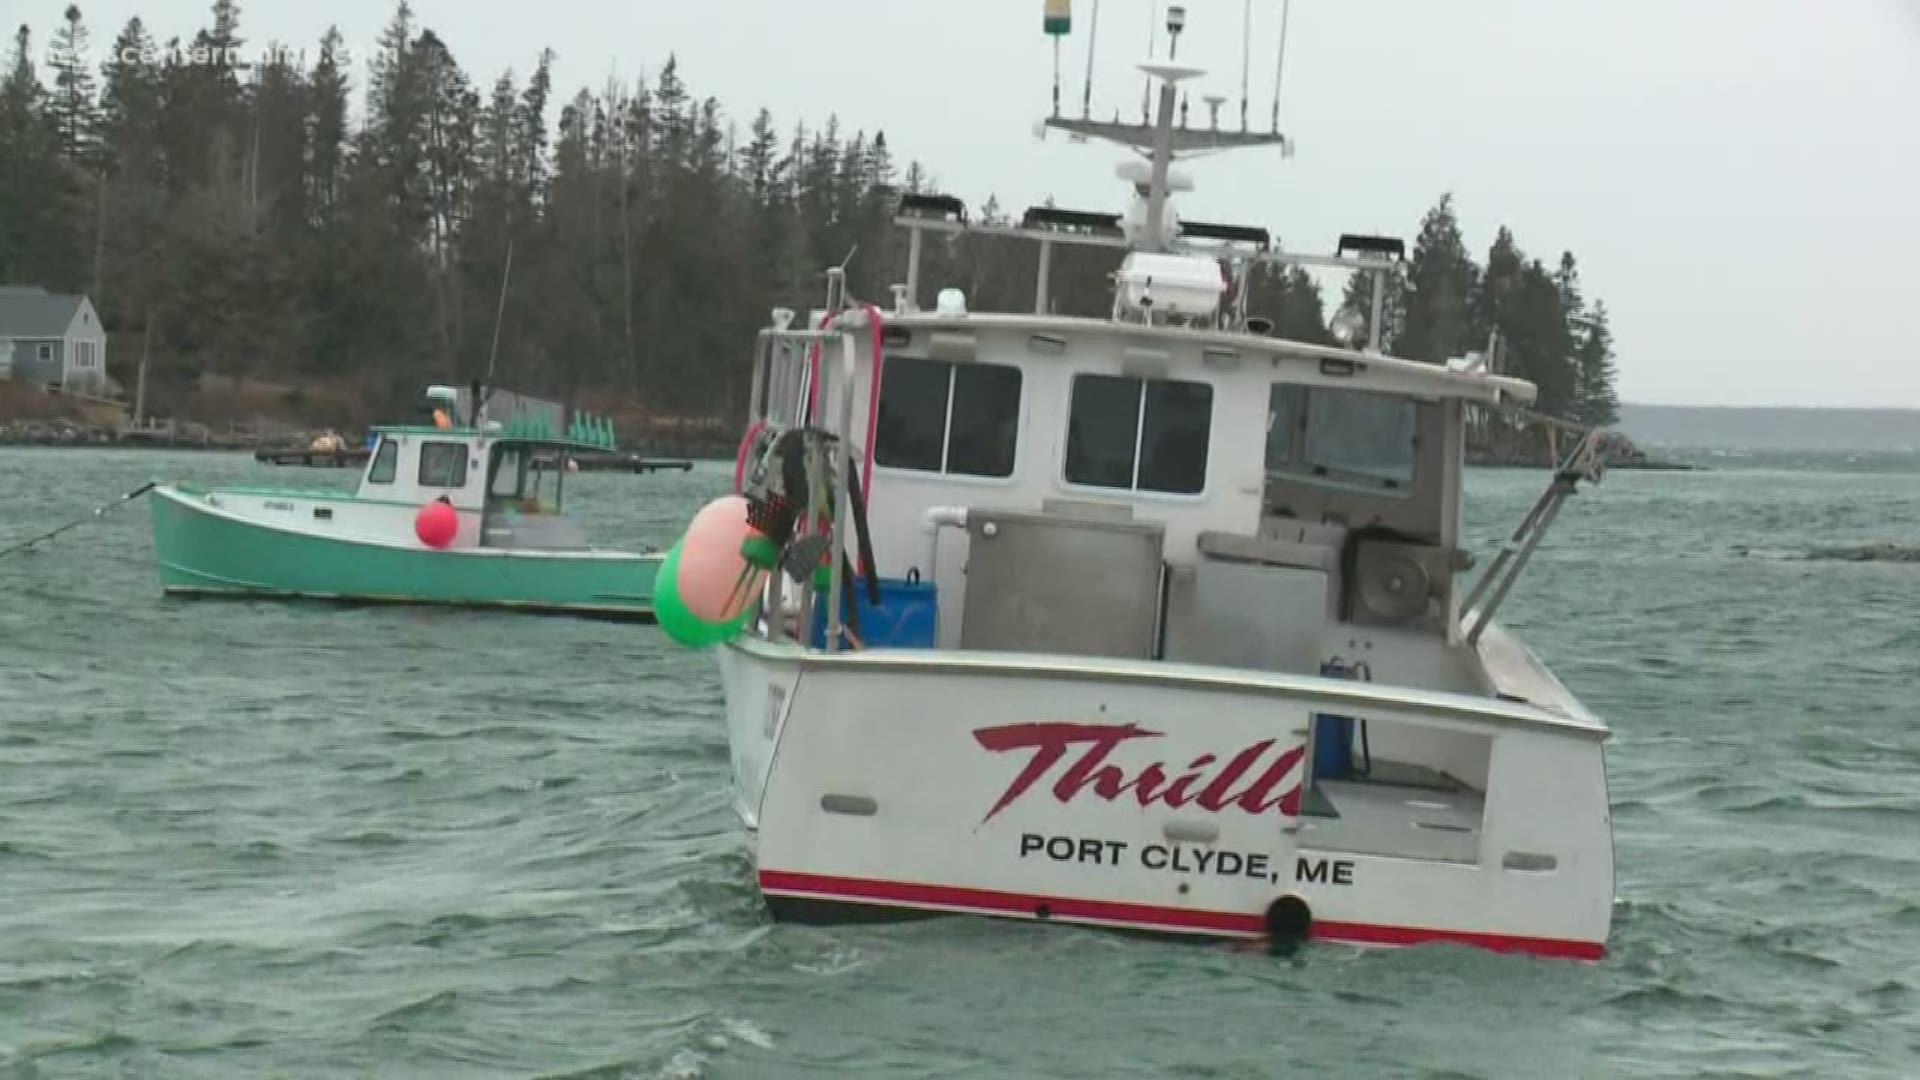 Maine's lobster catch in 2019